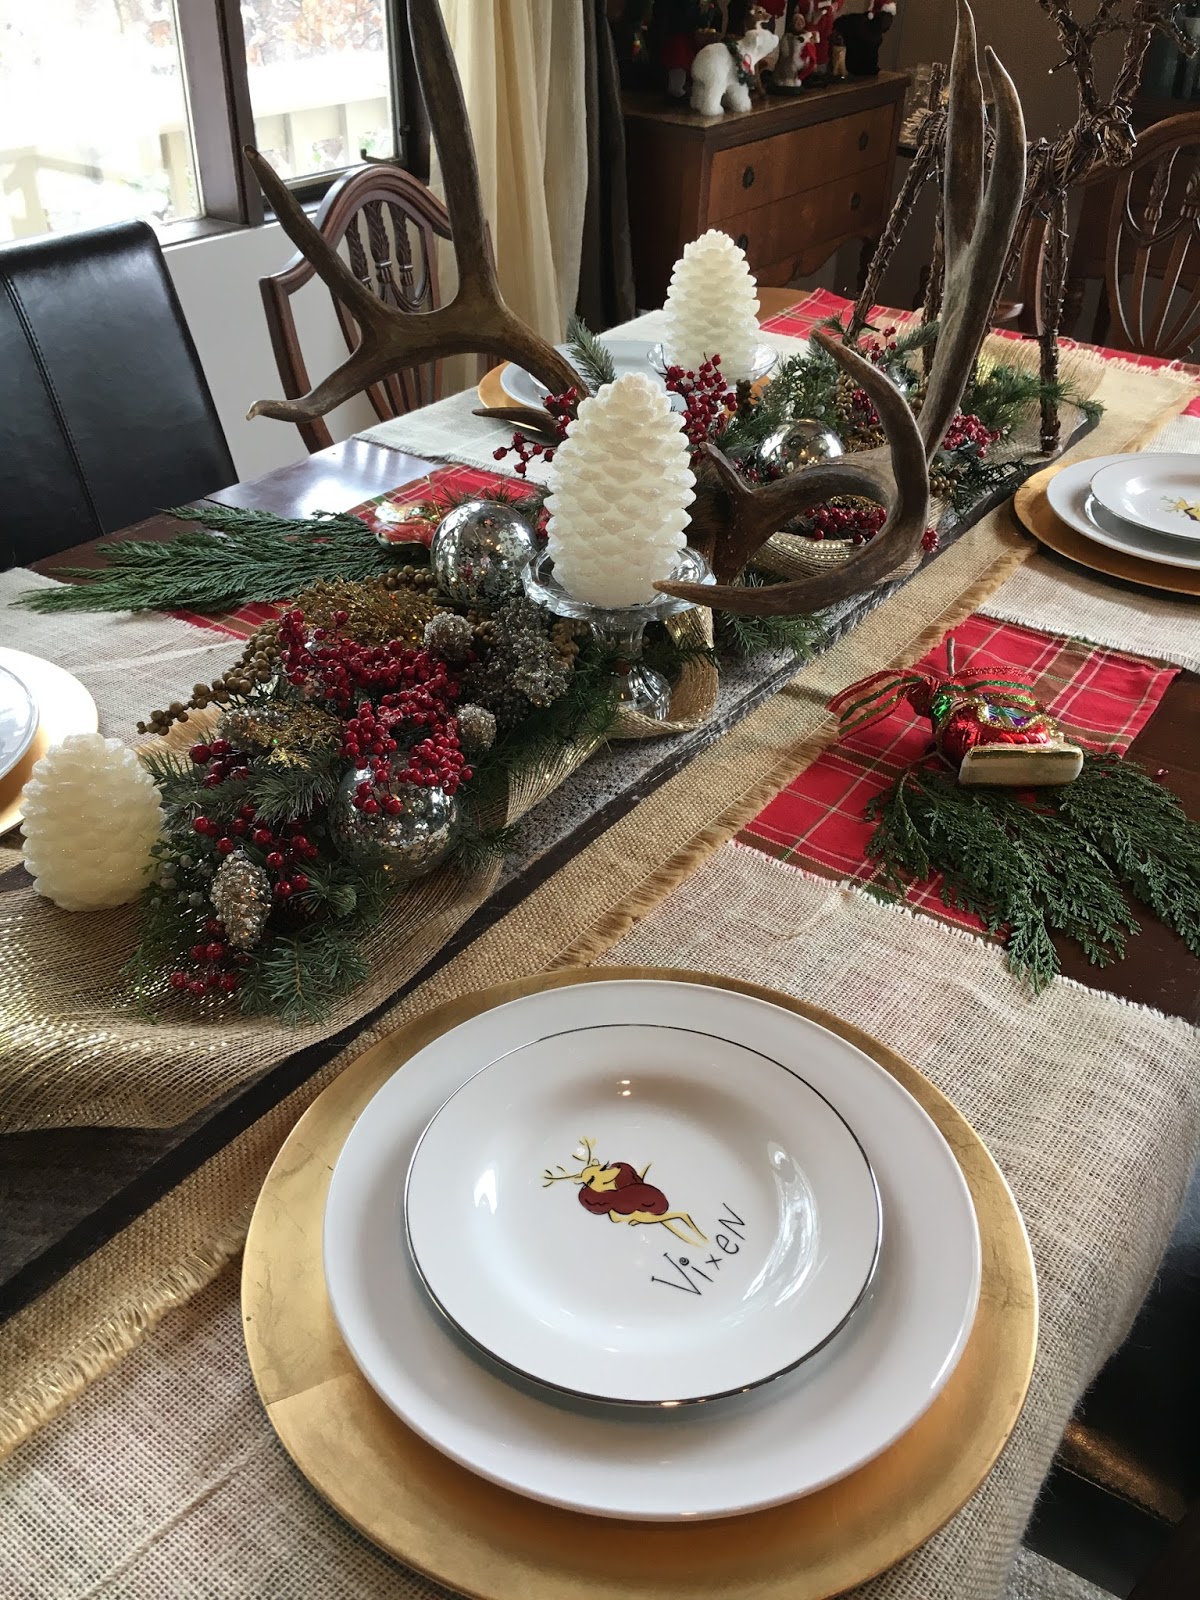 DesignsandEvents: A Price-less Christmas Treasure Collection